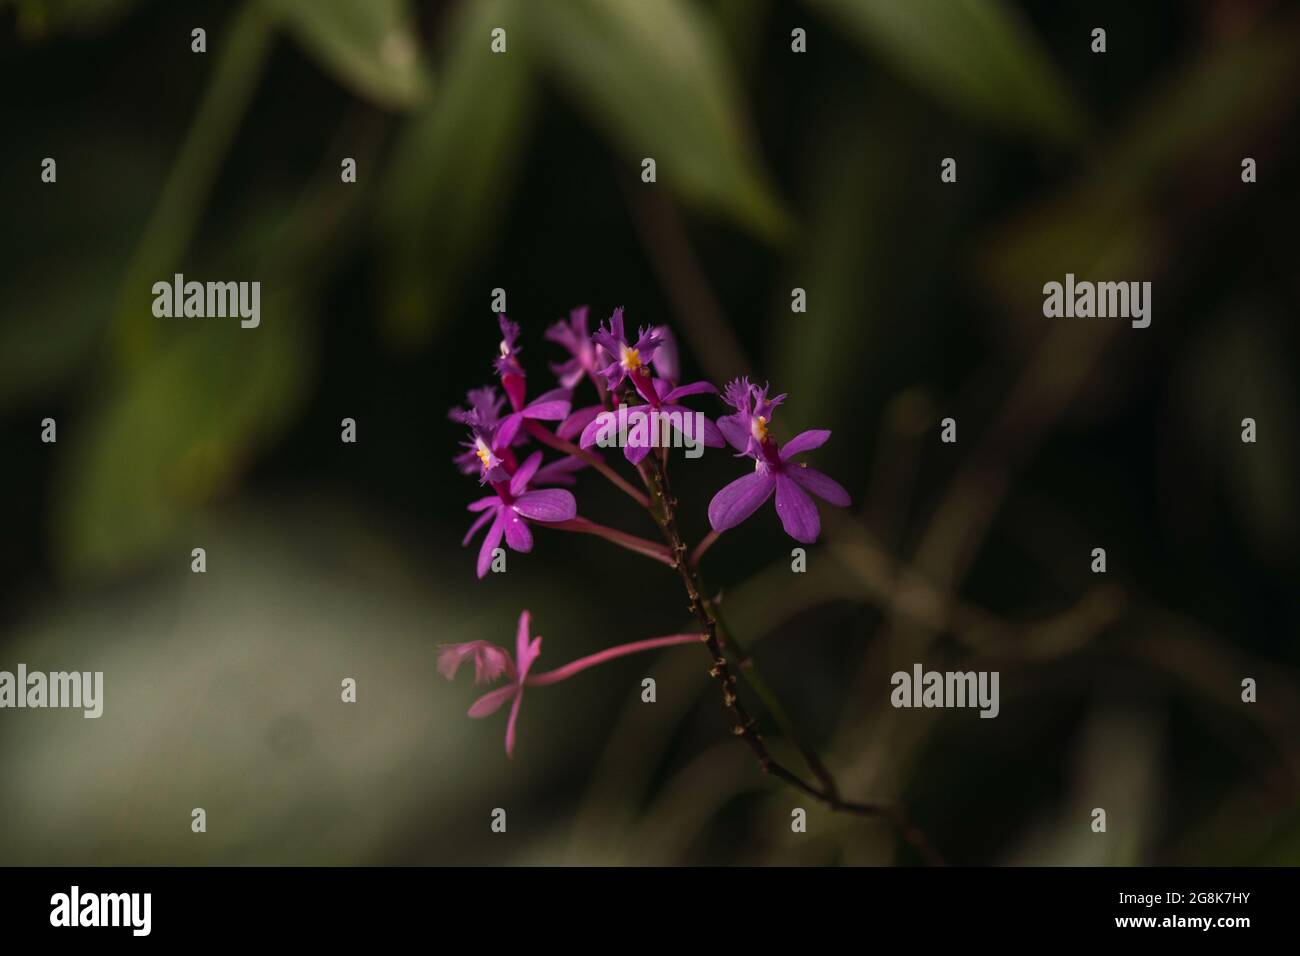 Closeup of a beautiful purple epidendrum flowers on a blurred leafy background Stock Photo